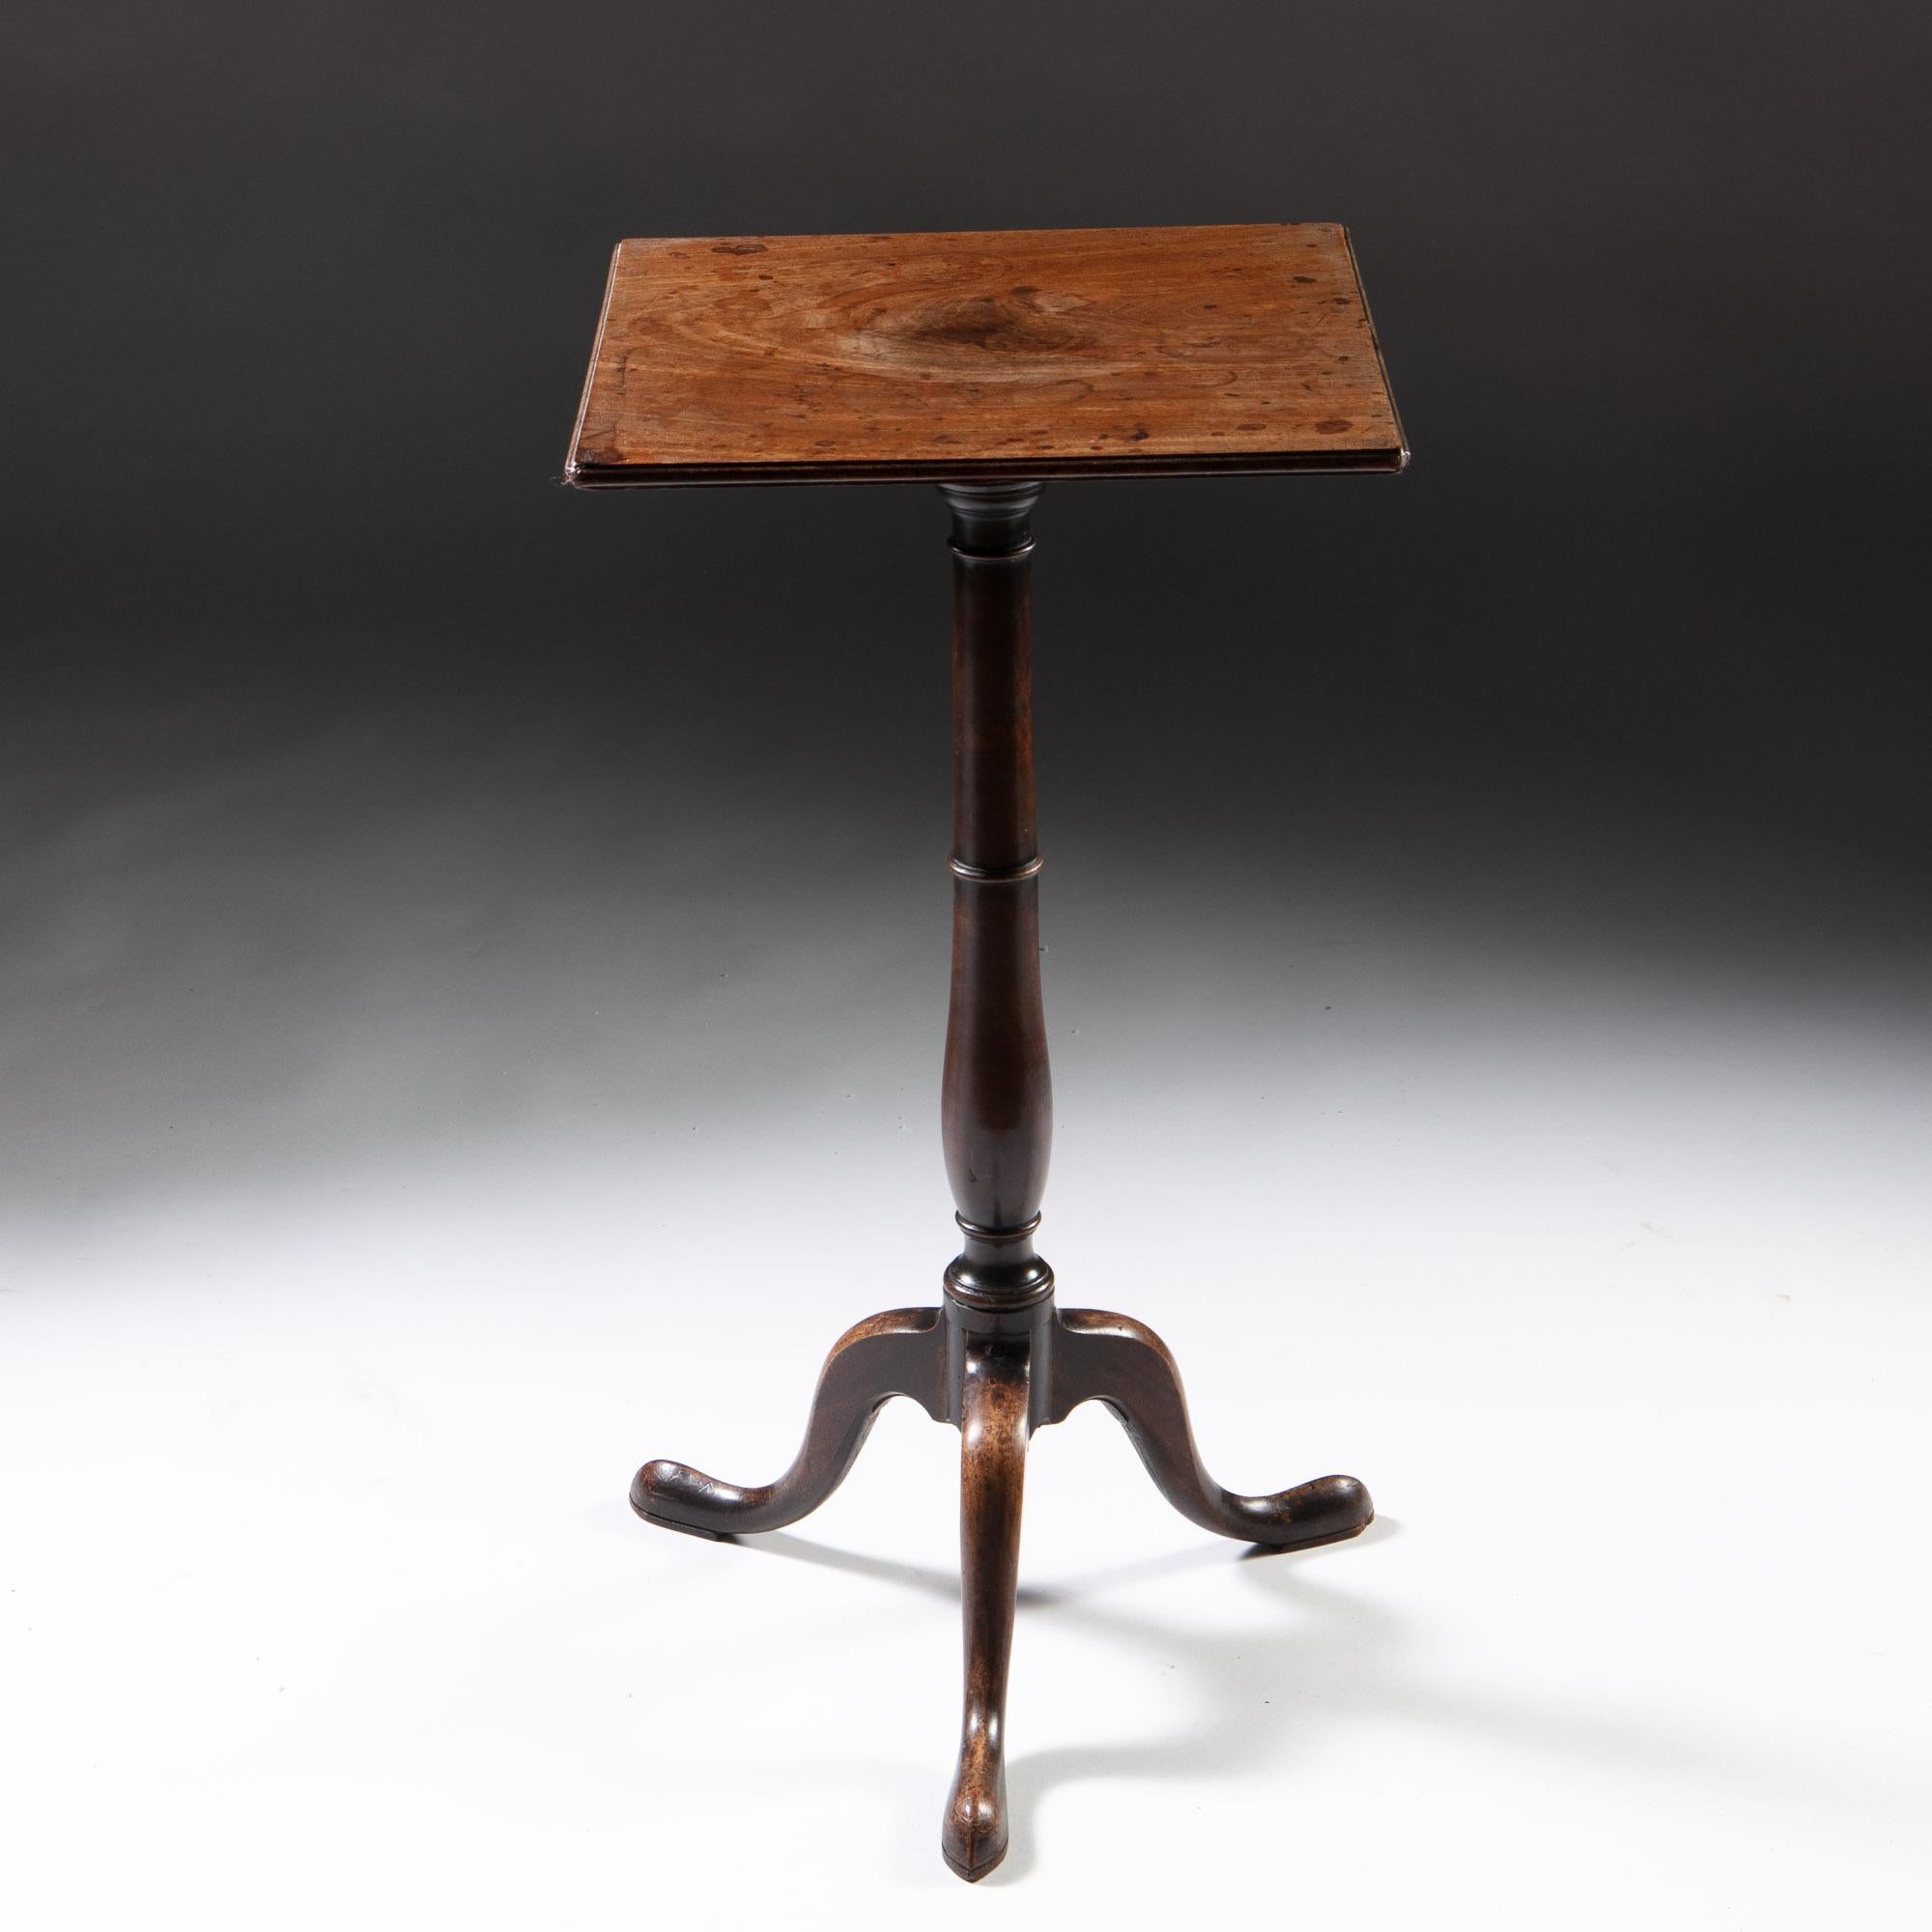 A charming George III period mahogany occasional table with sun bleached top, supported on a baluster stem terminating in three splayed legs.